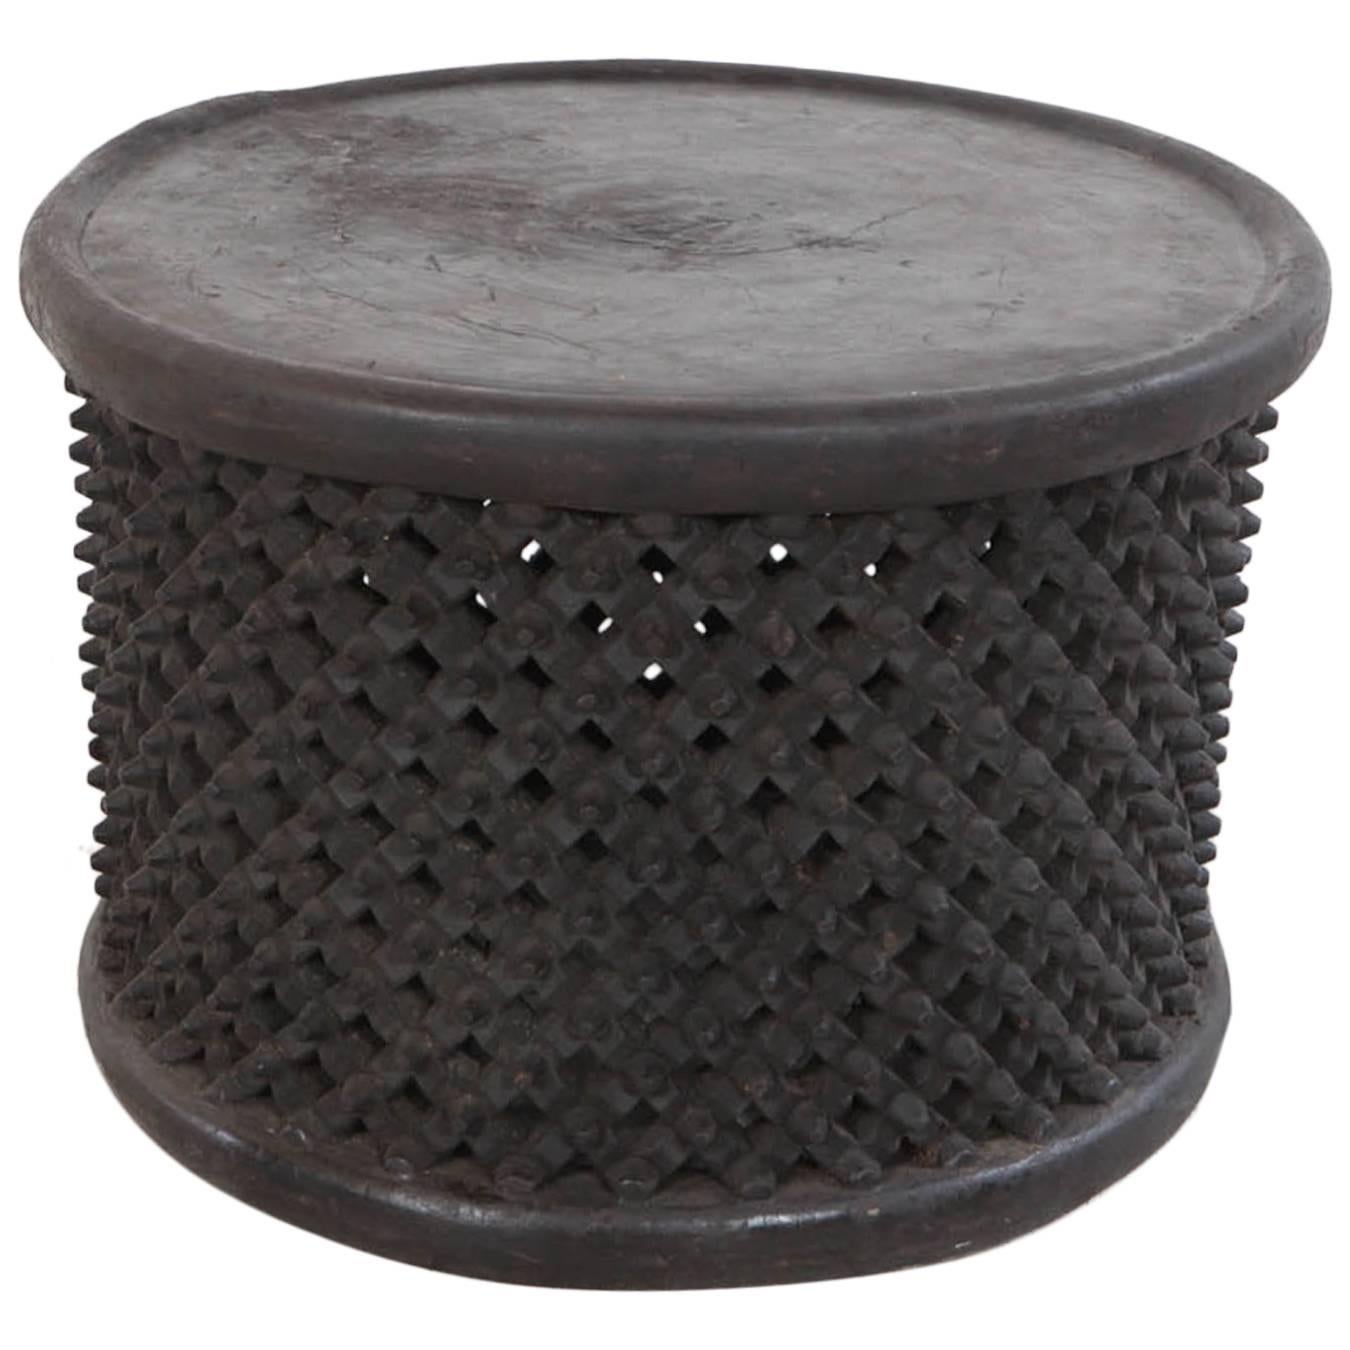 Round African Stool or Drum Table from Cameroon